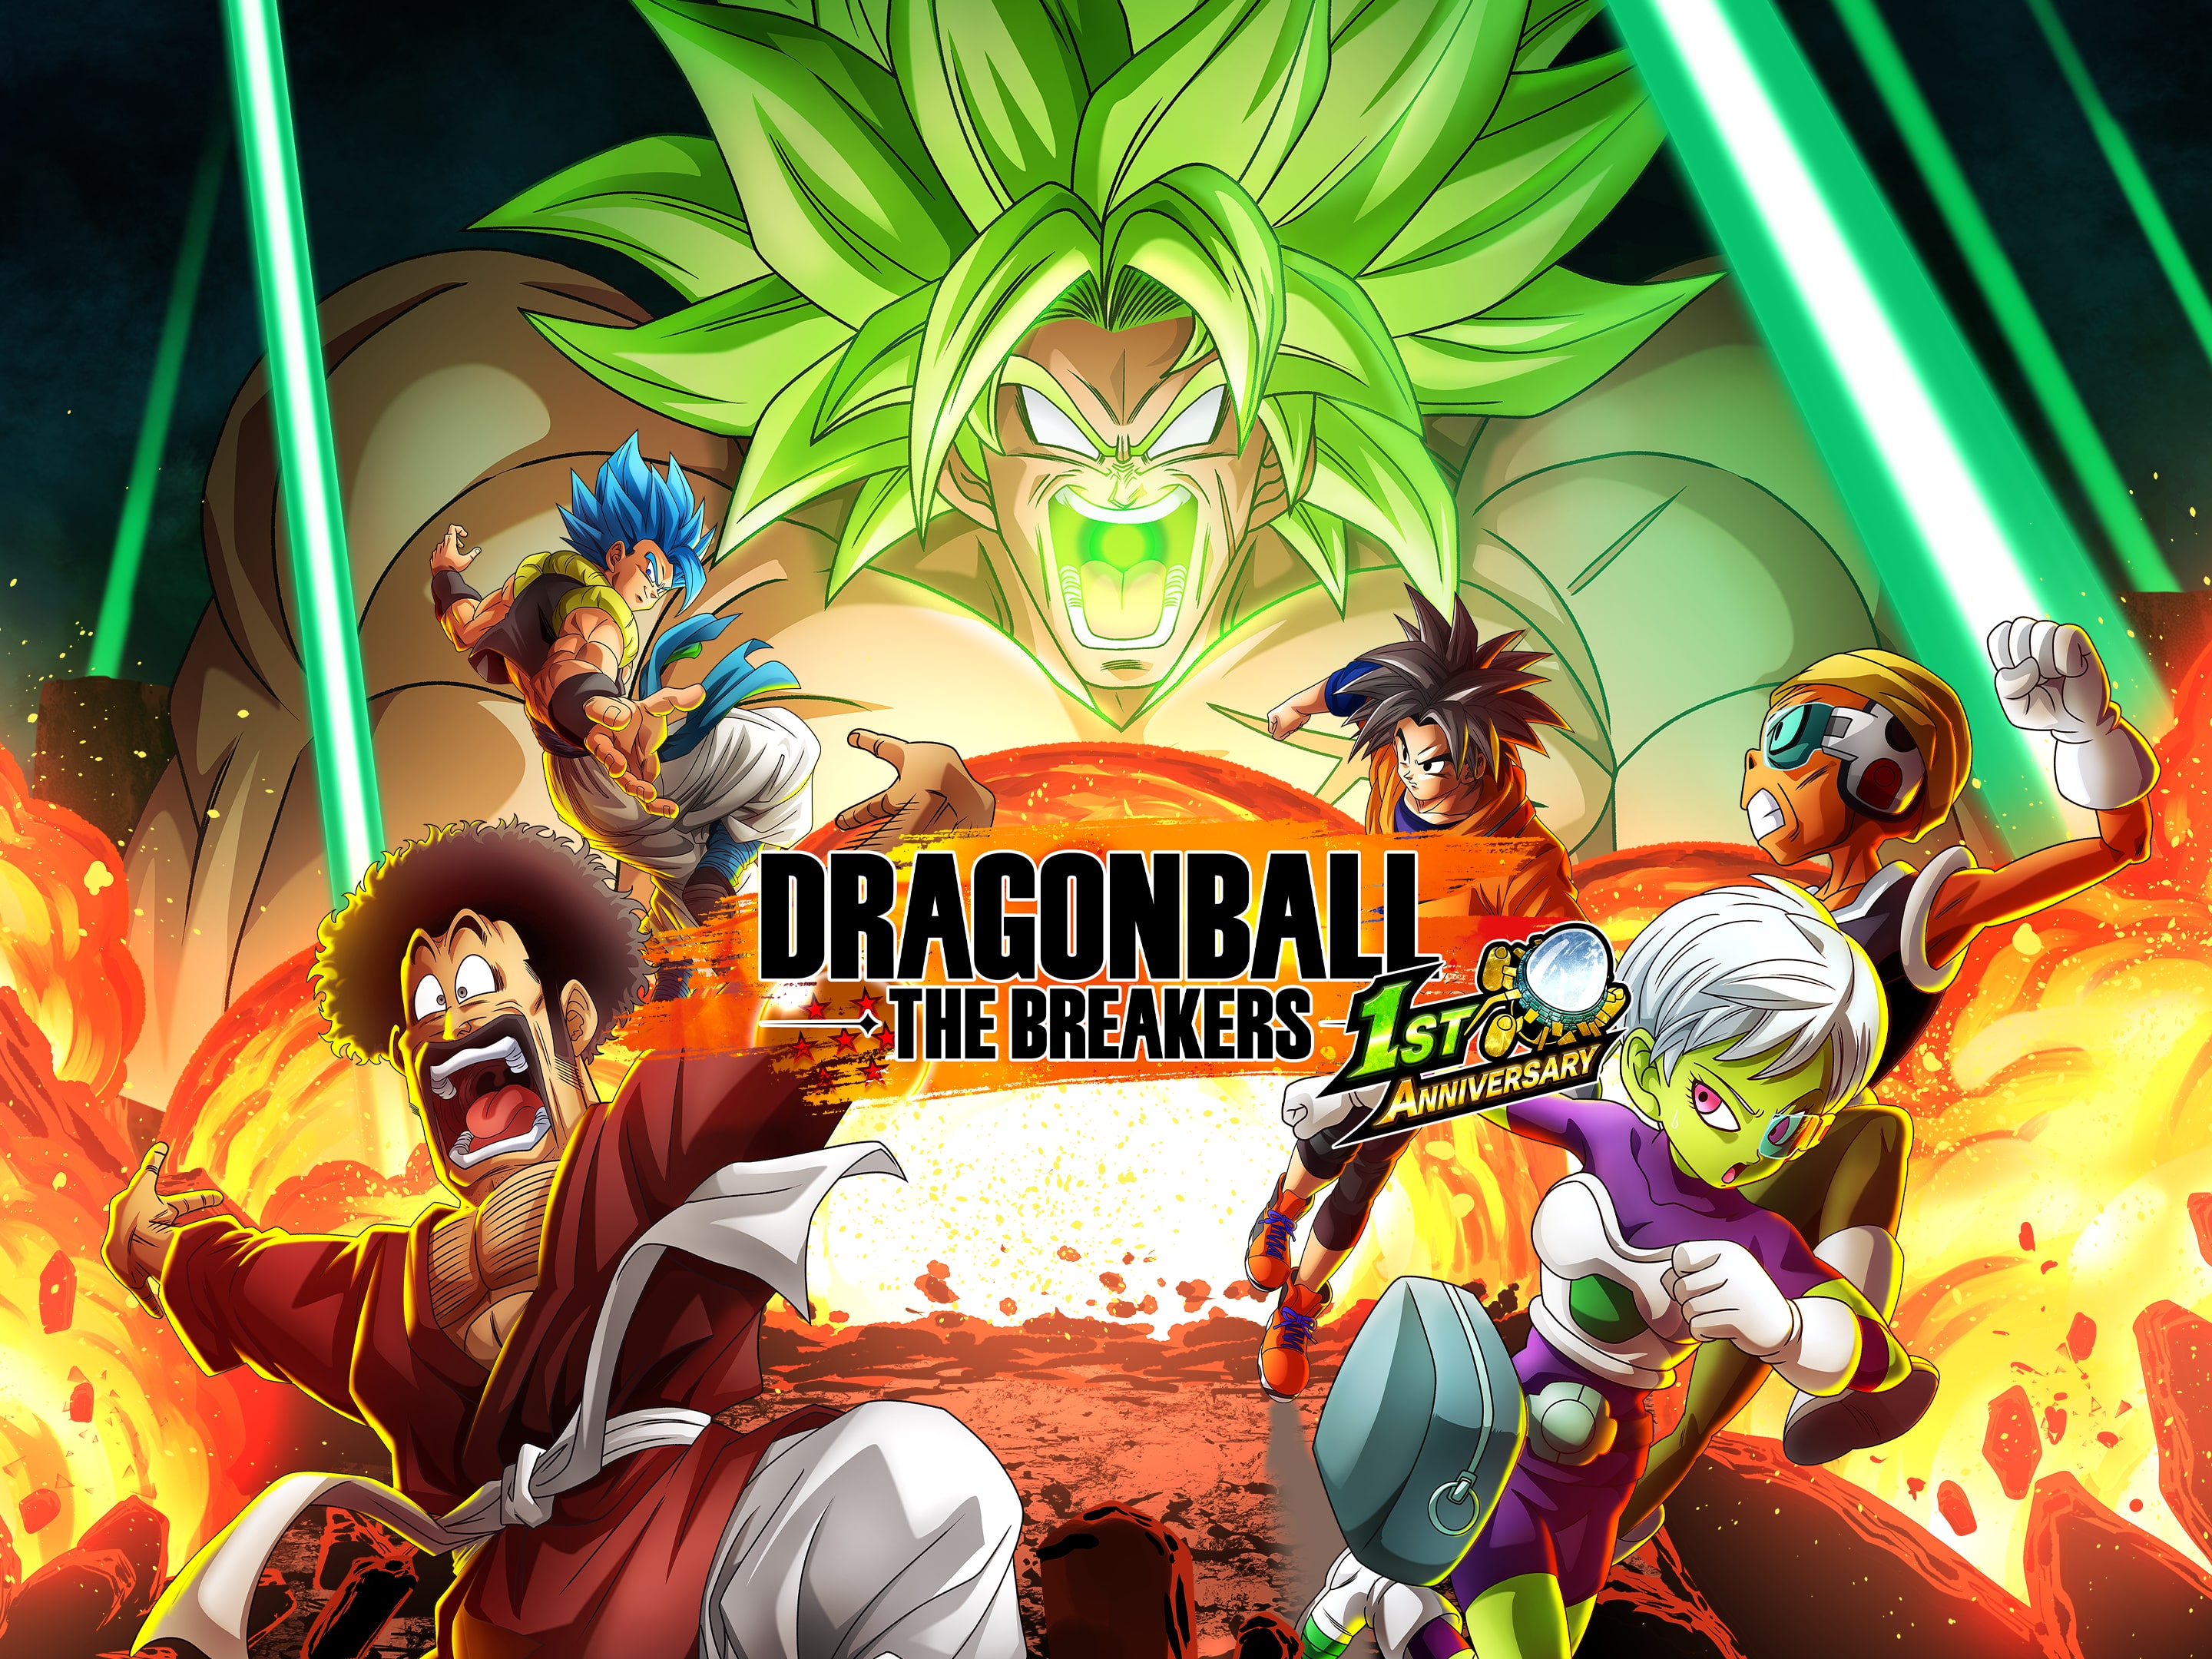 Dragon Ball: The Breakers on PS4 — price history, screenshots, discounts •  USA